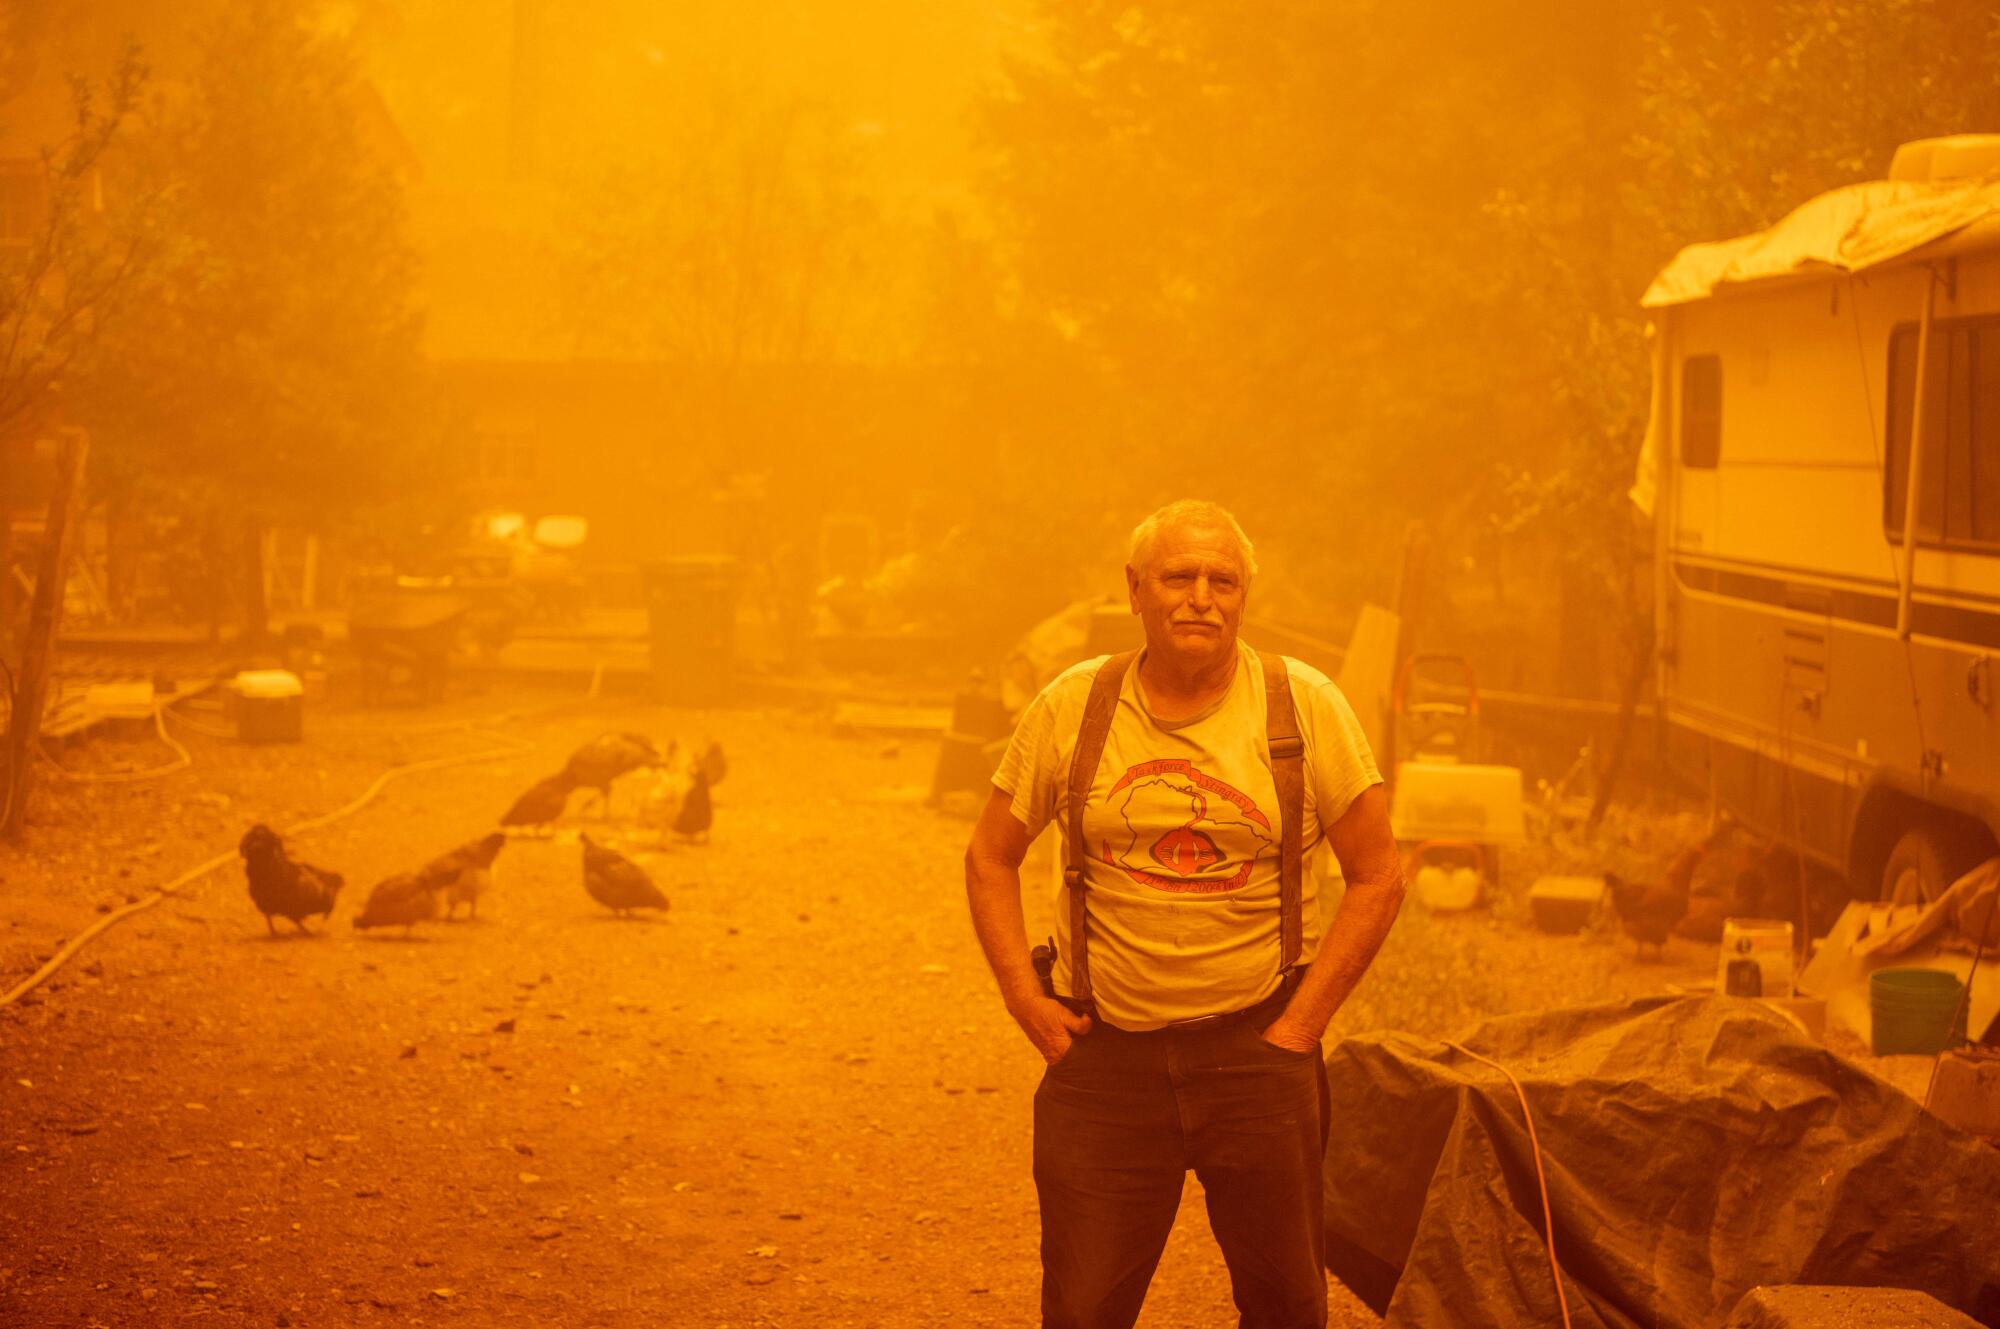 Resident Jon Cappleman looks on as he prepares to defend his home during the Dixie fire in Twain, Calif.